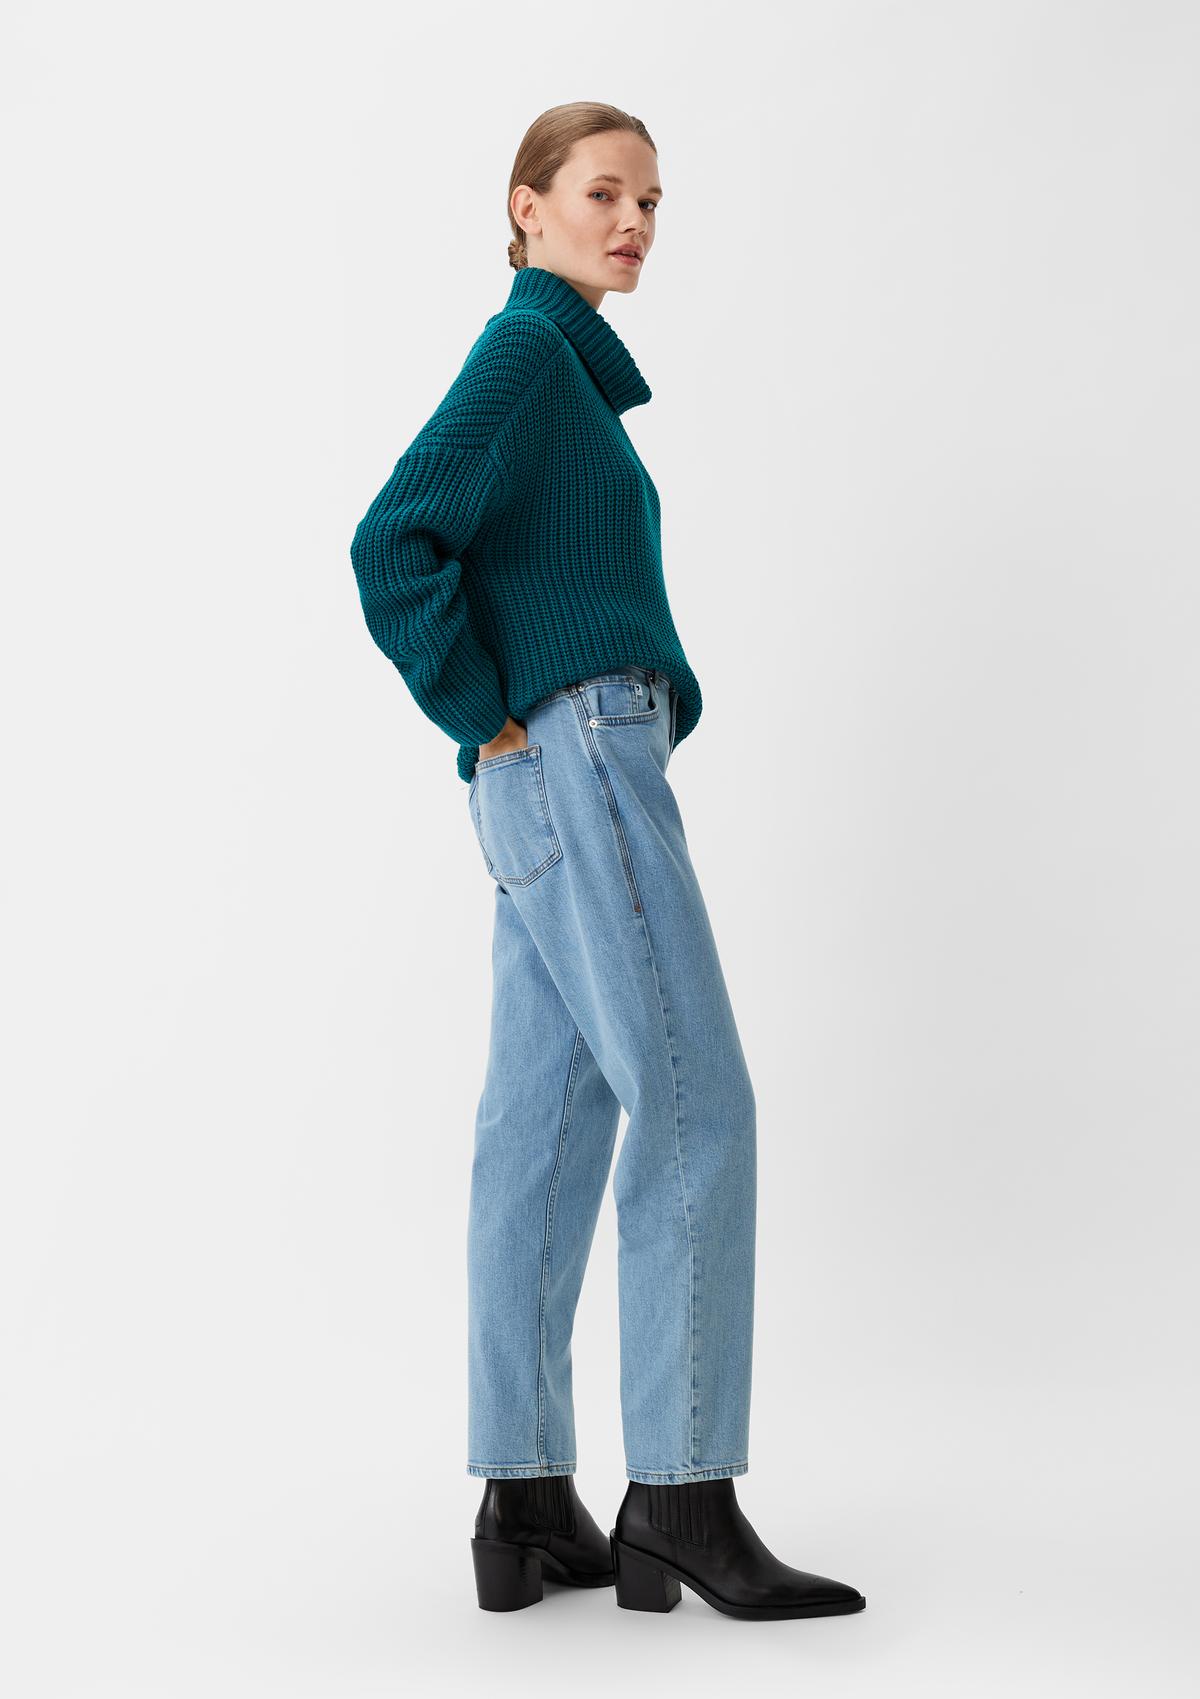 Mom fit: jeans with a slim leg